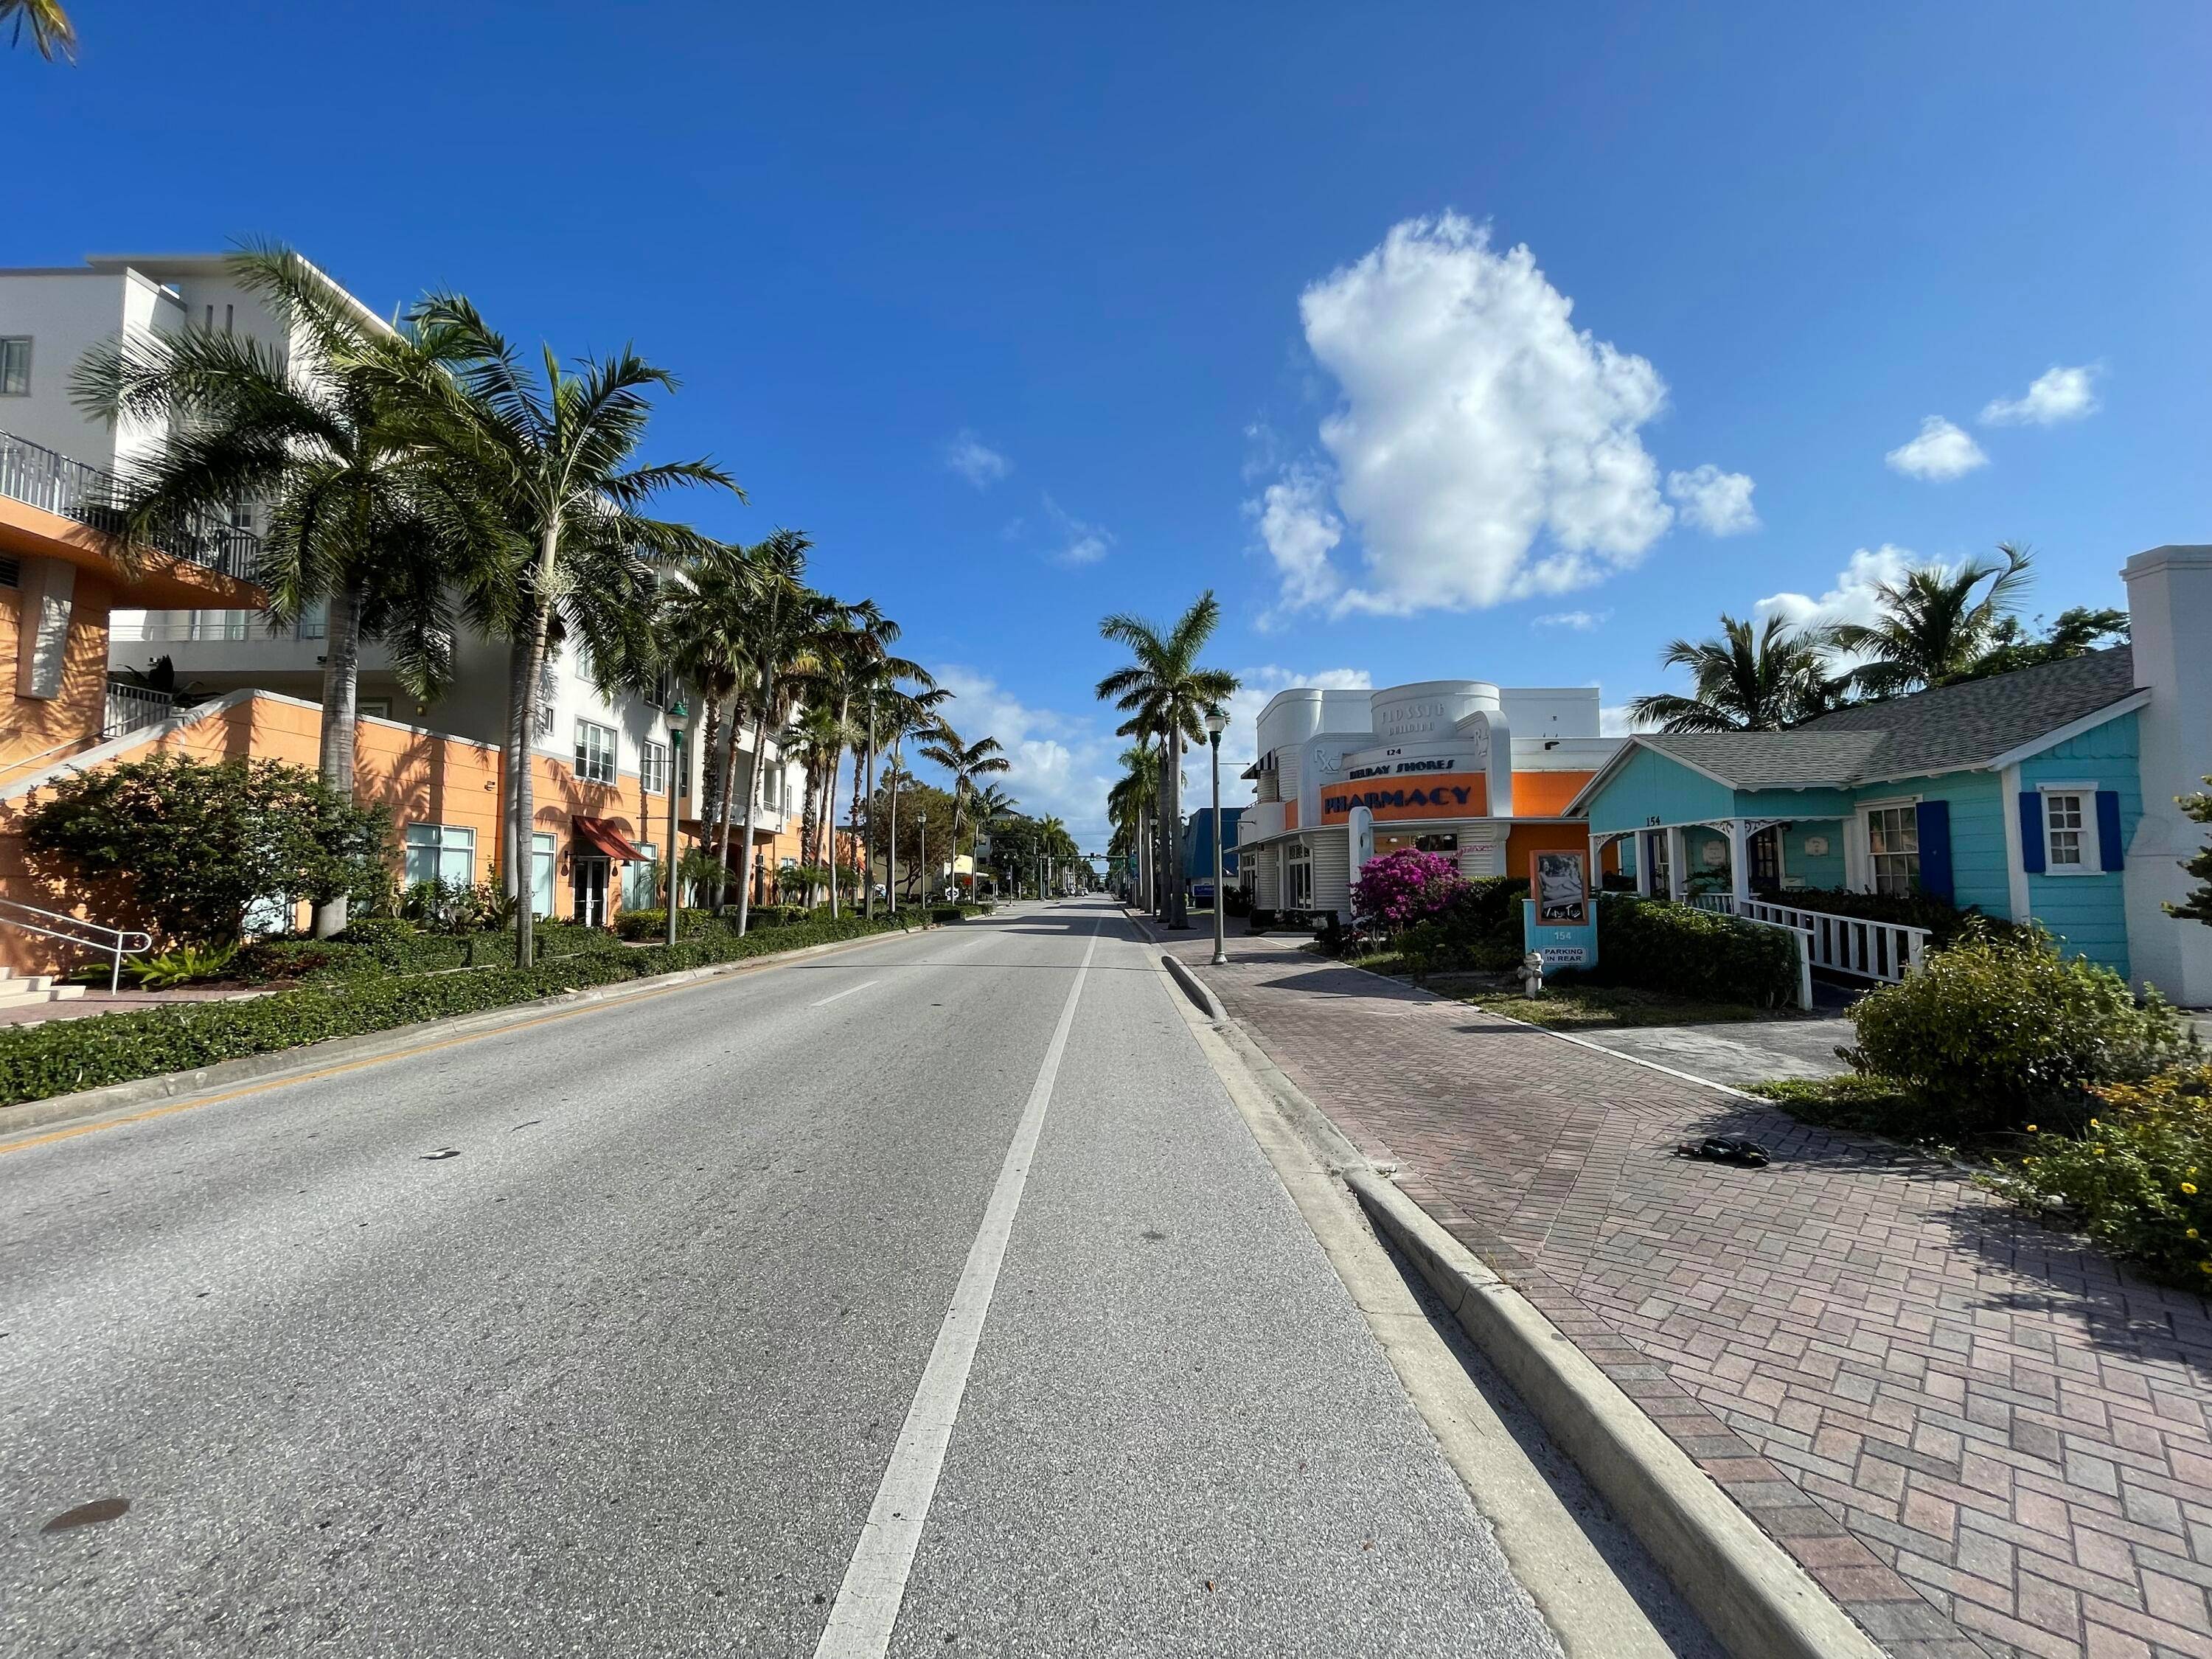 For Lease, One block North of Atlantic Avenue on US 1 in Delray Beach.